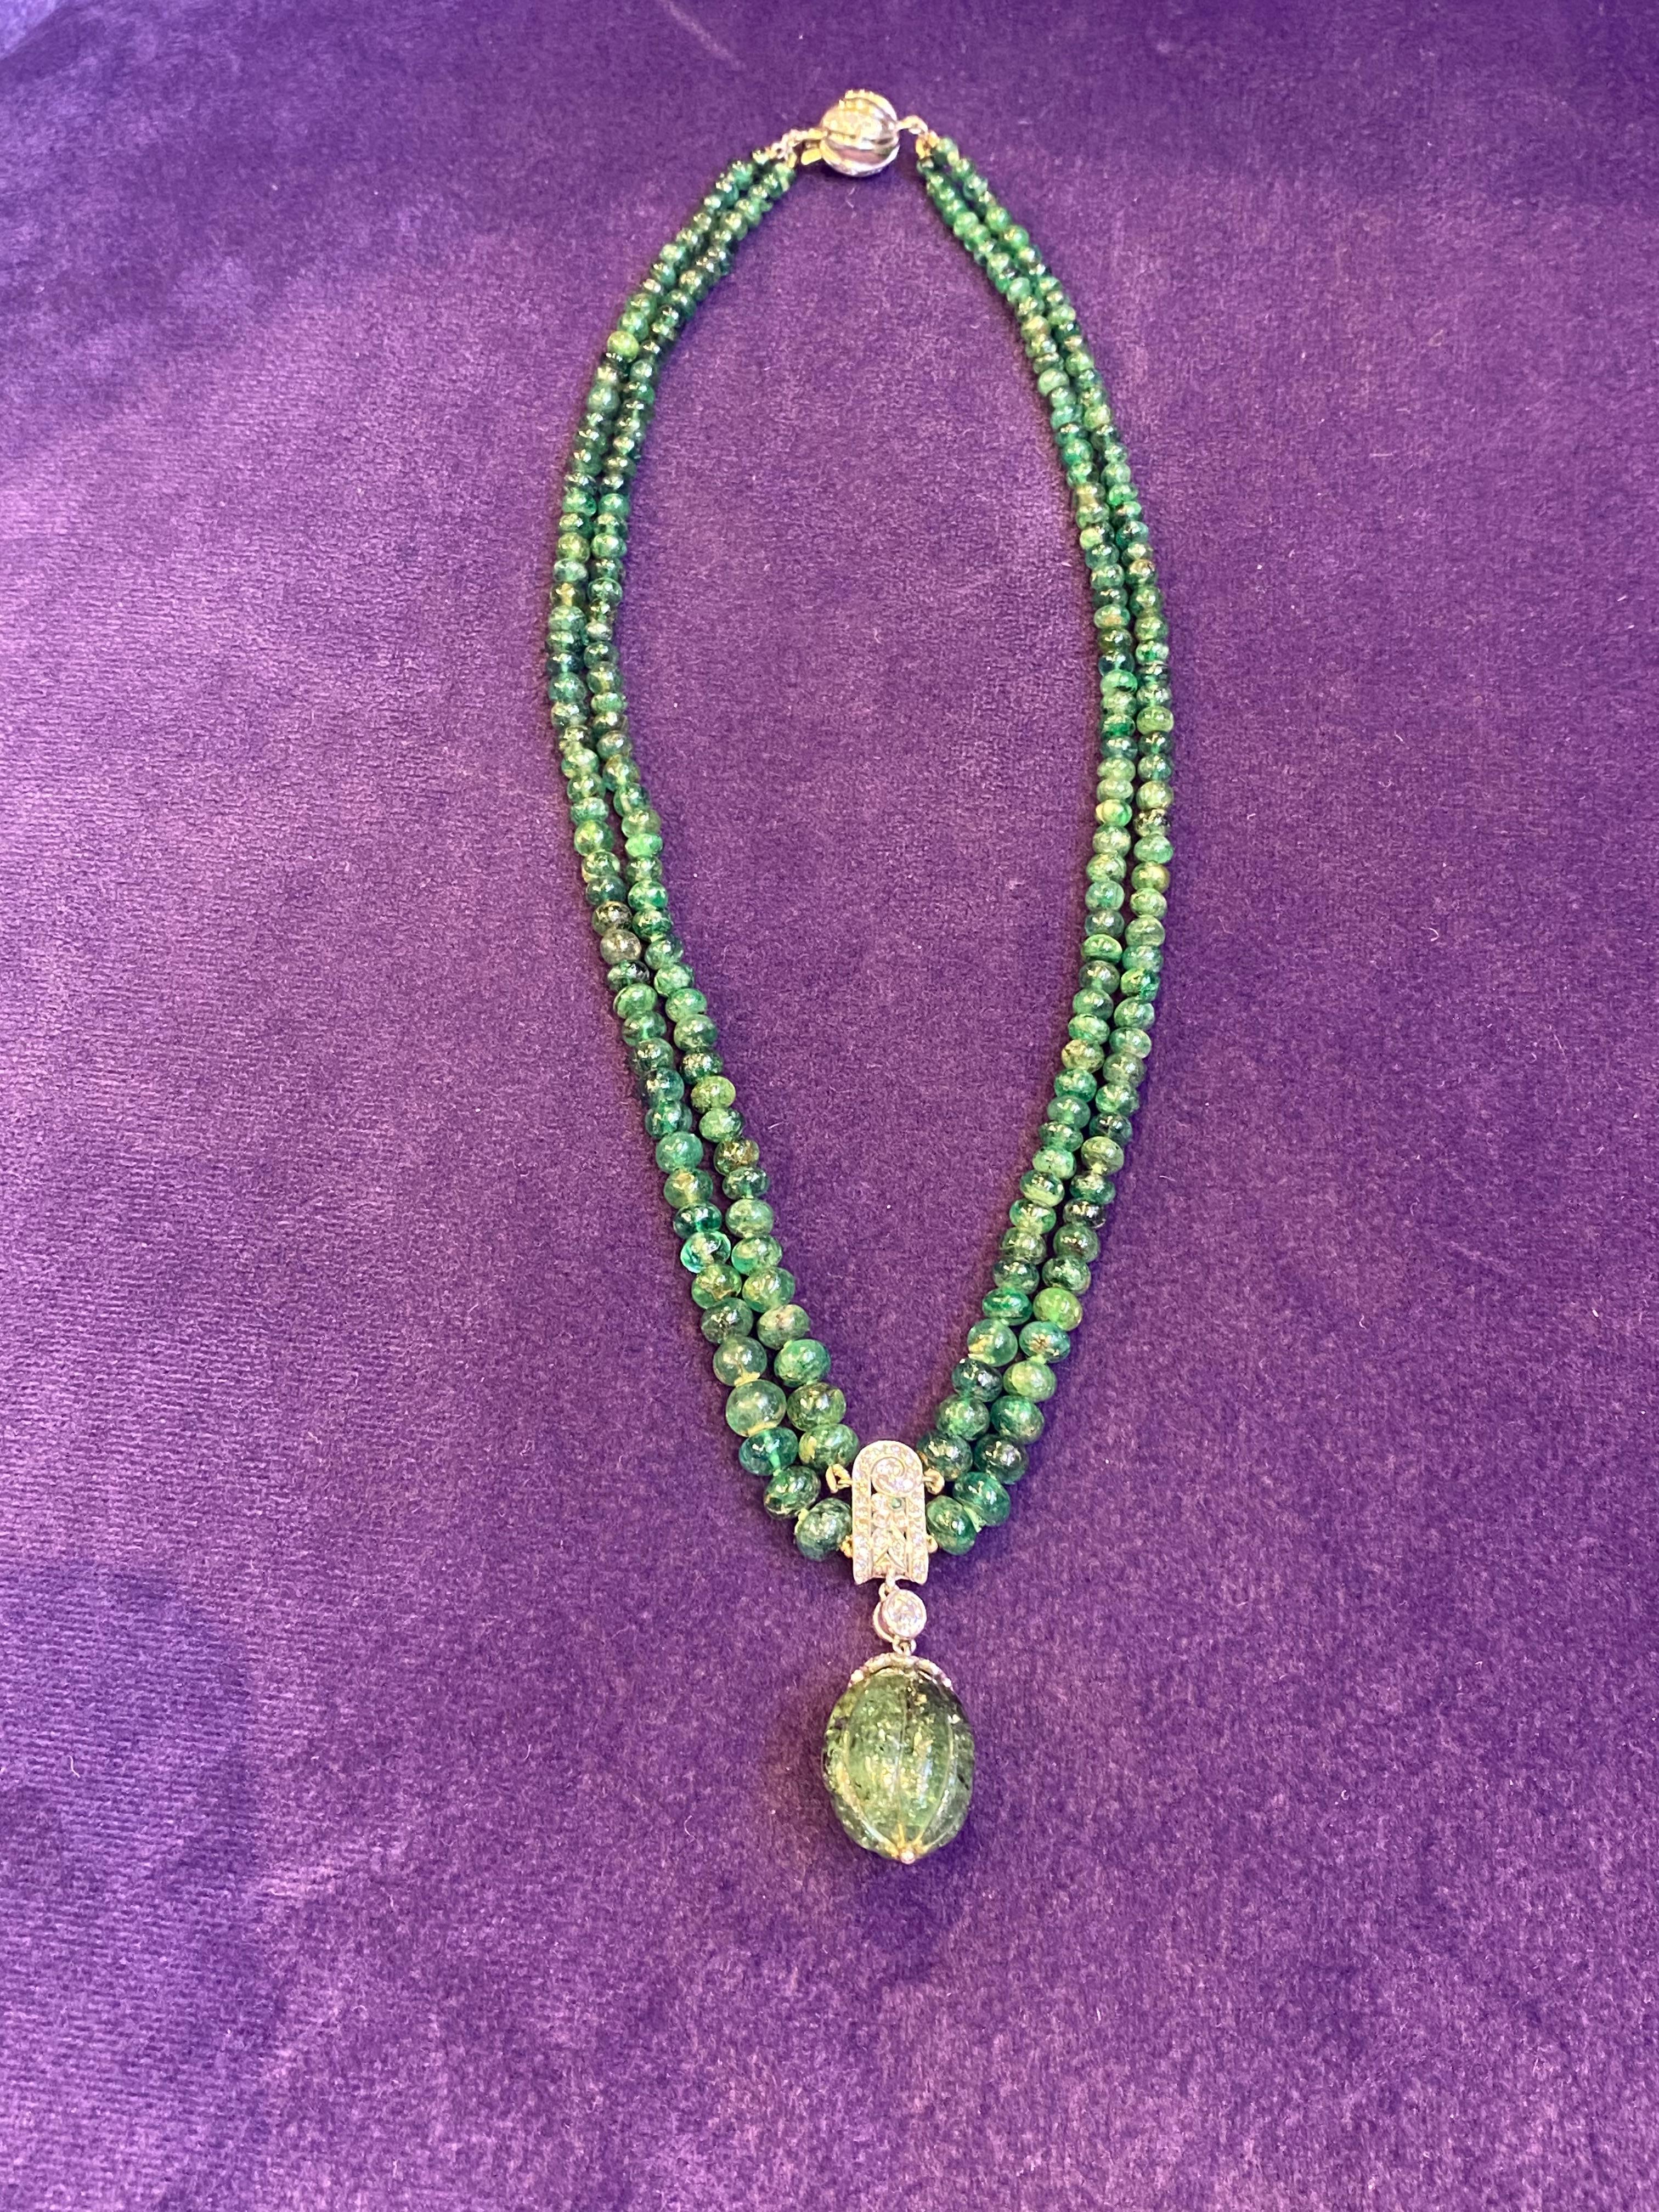 Multi Strand Emerald Bead Necklace In Excellent Condition For Sale In New York, NY